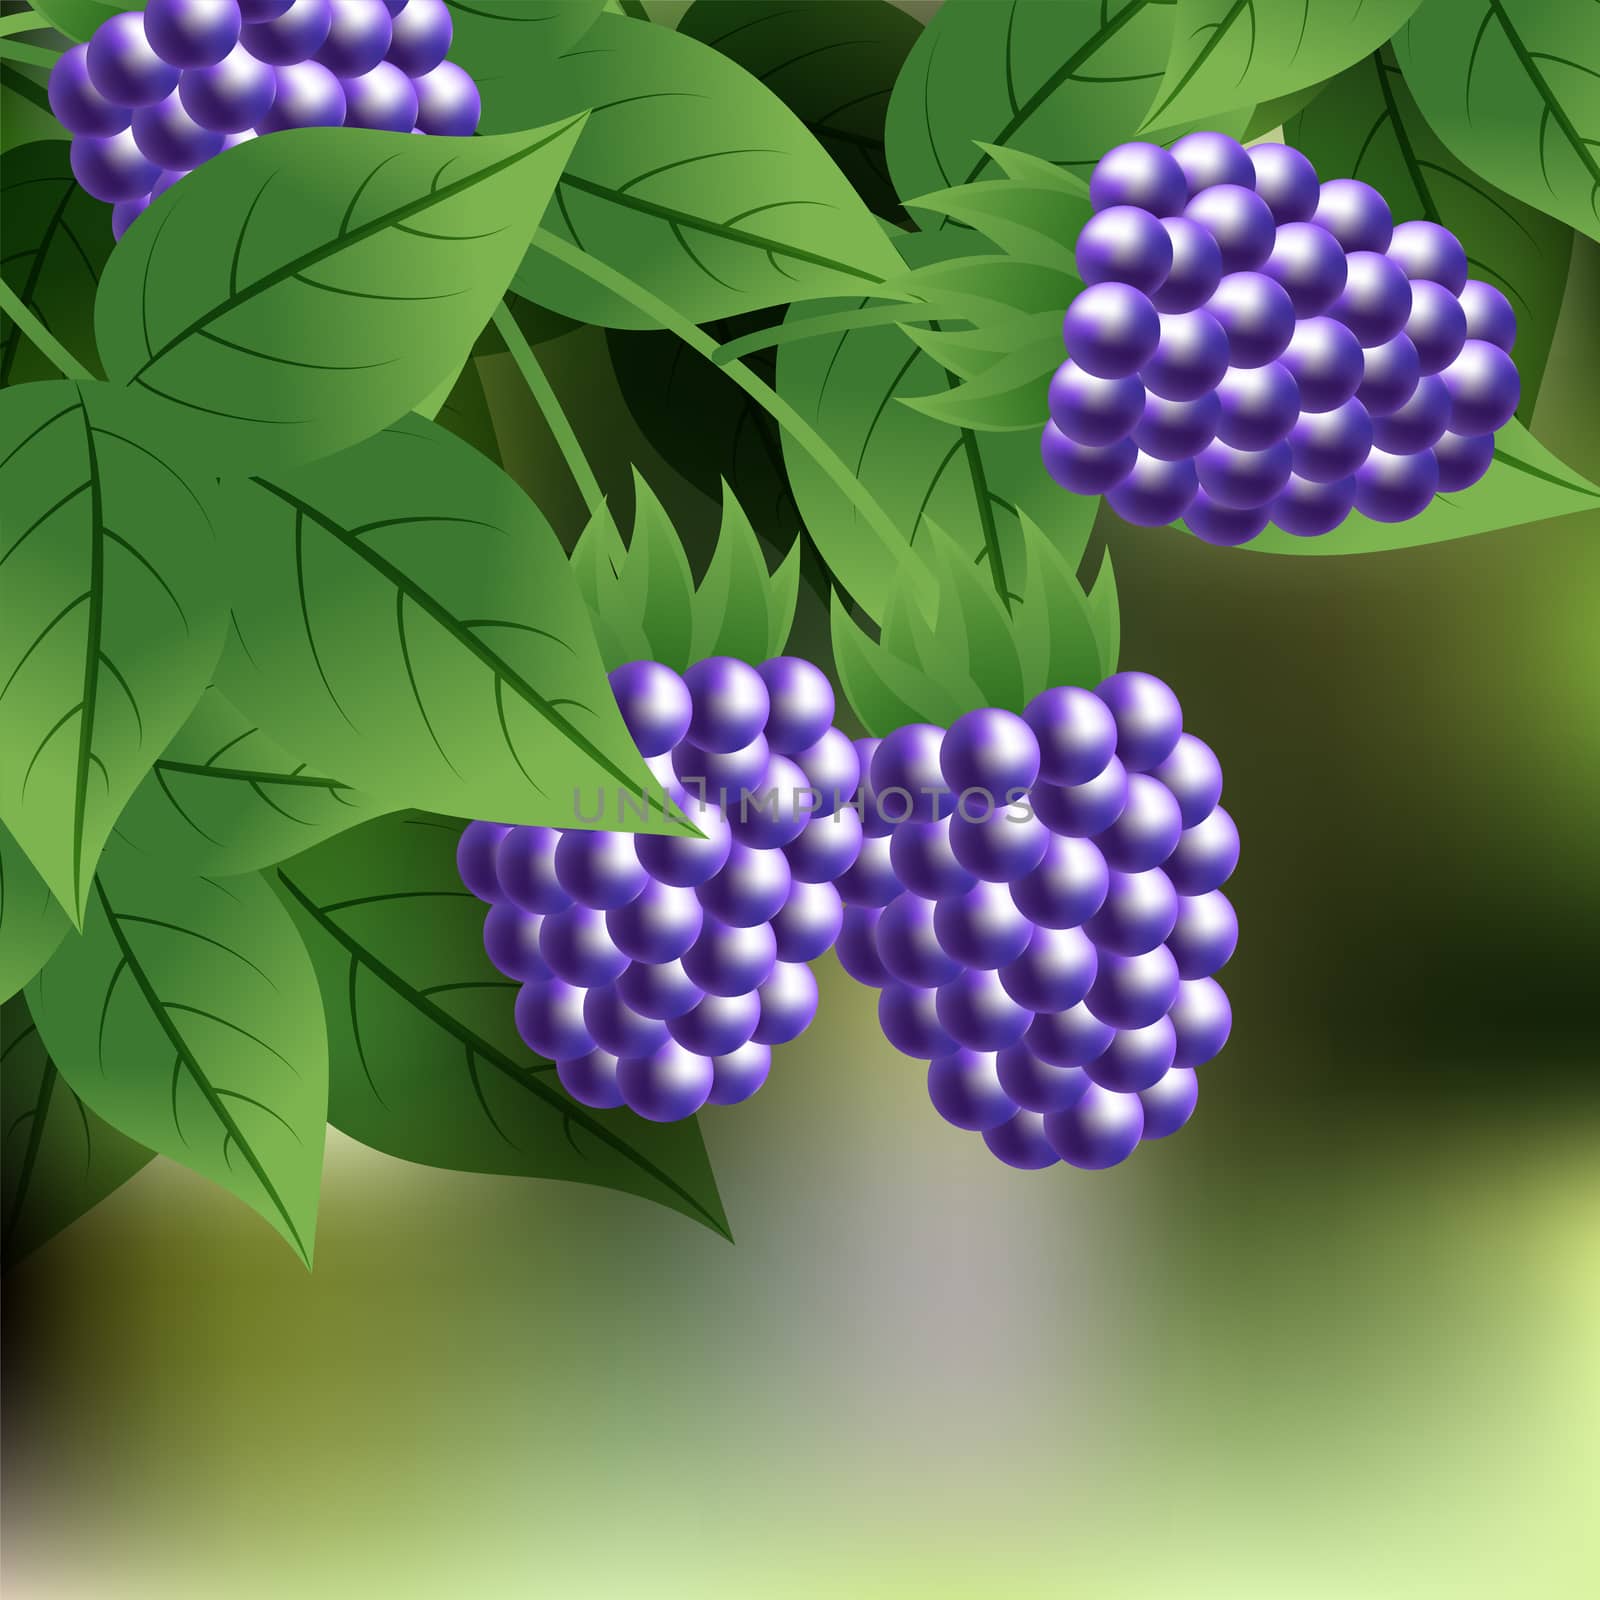 black, ripe, sweet blackberry hanging on a branch with green leaves. illustration